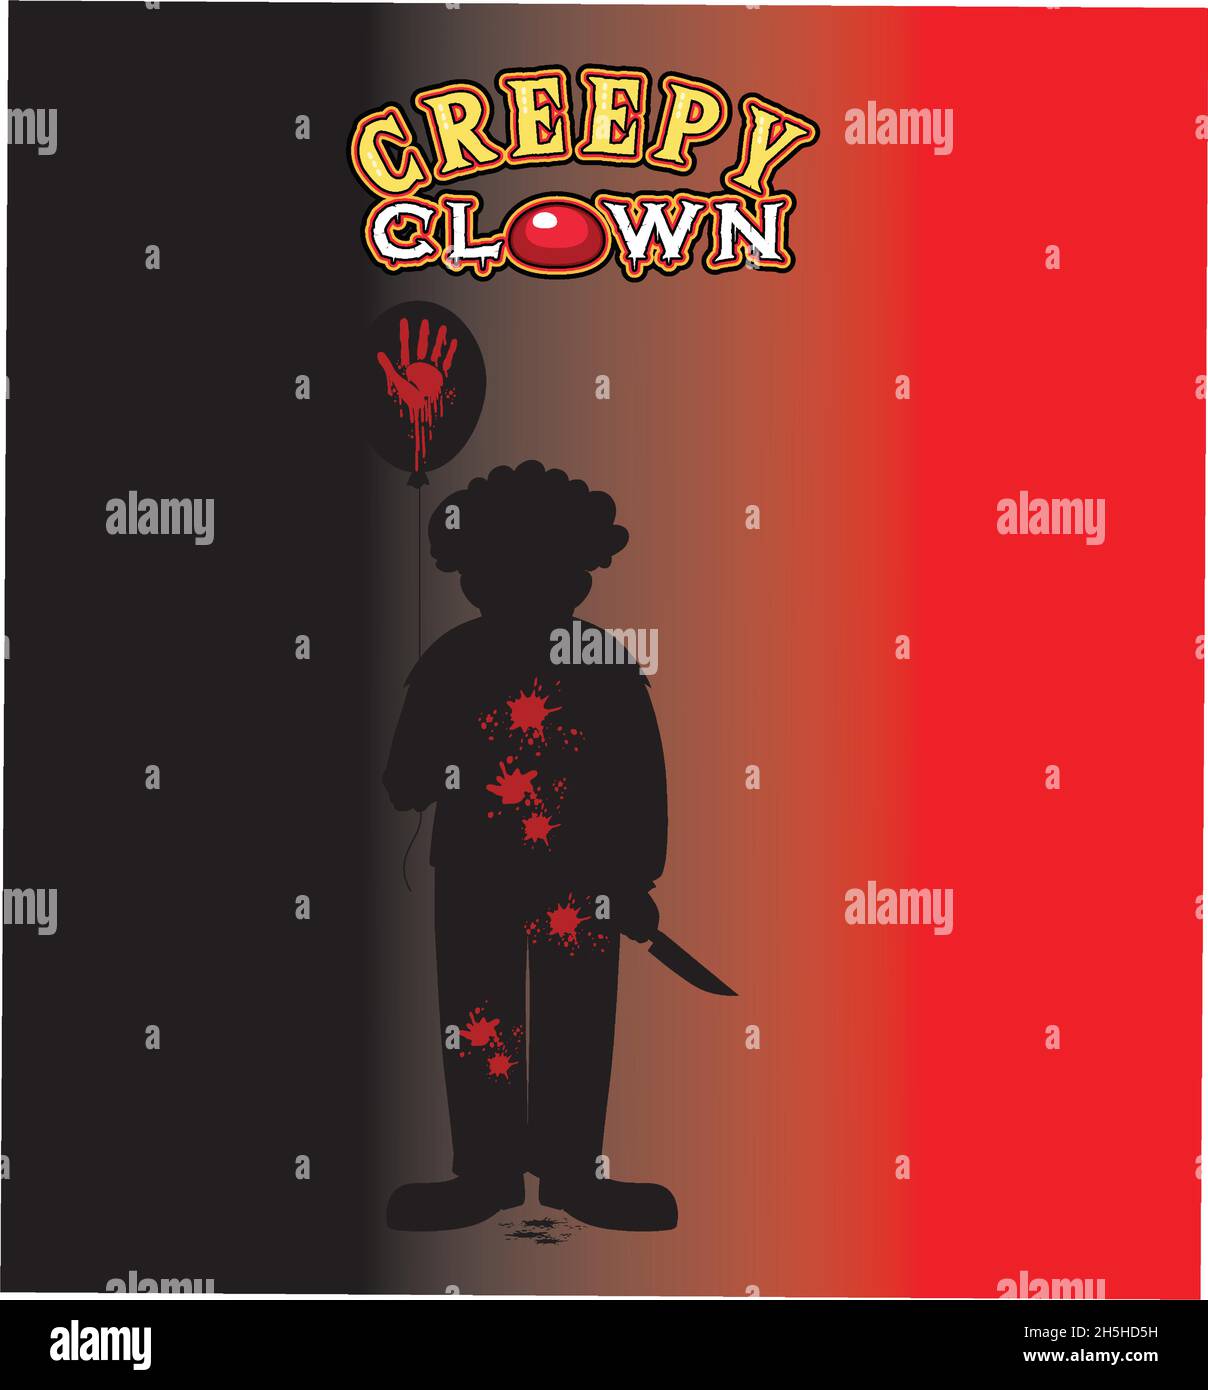 Creepy Clown text poster with clown silhouette illustration Stock Vector